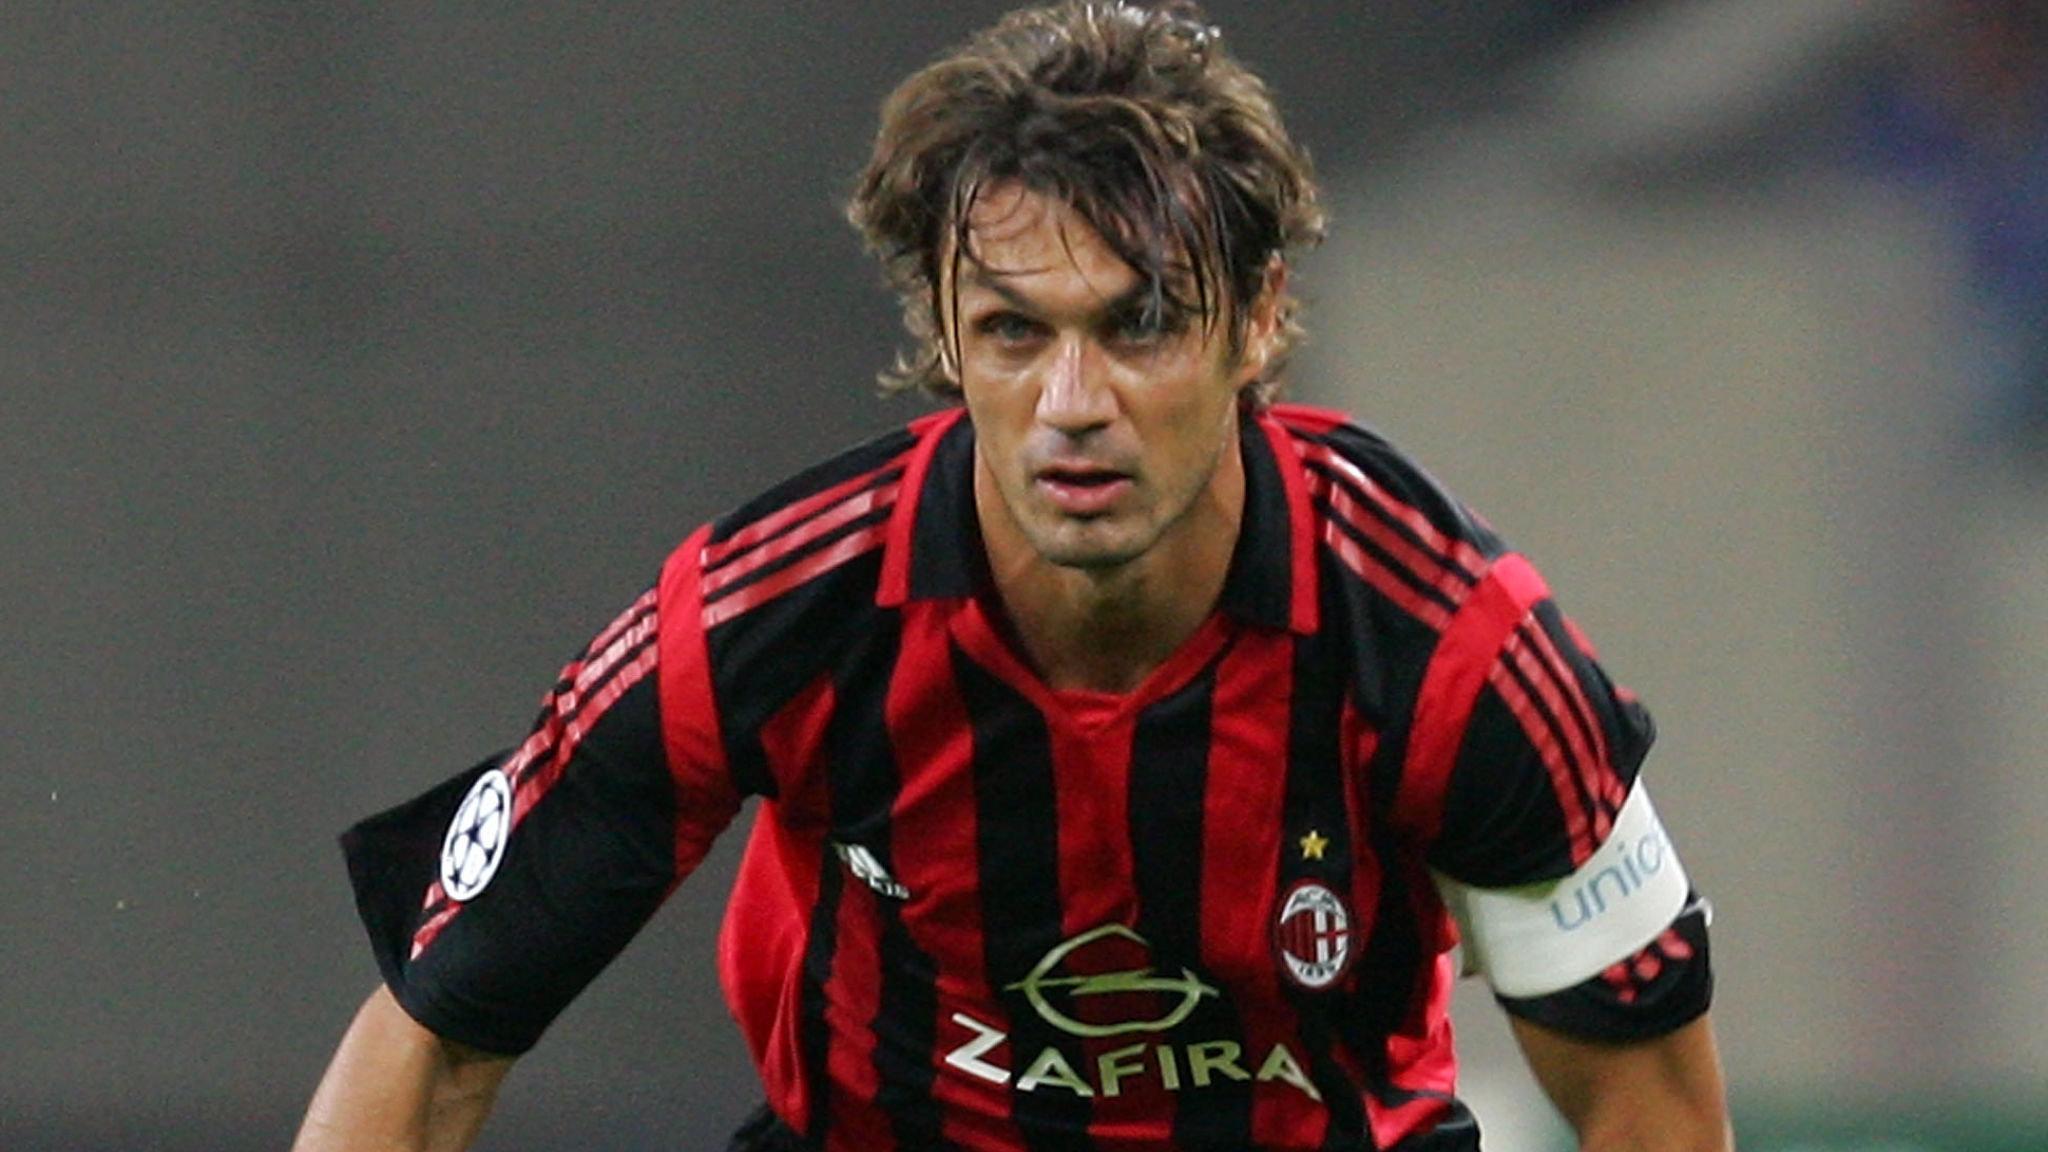 Paolo Maldini returns to AC Milan to take up new position. Football